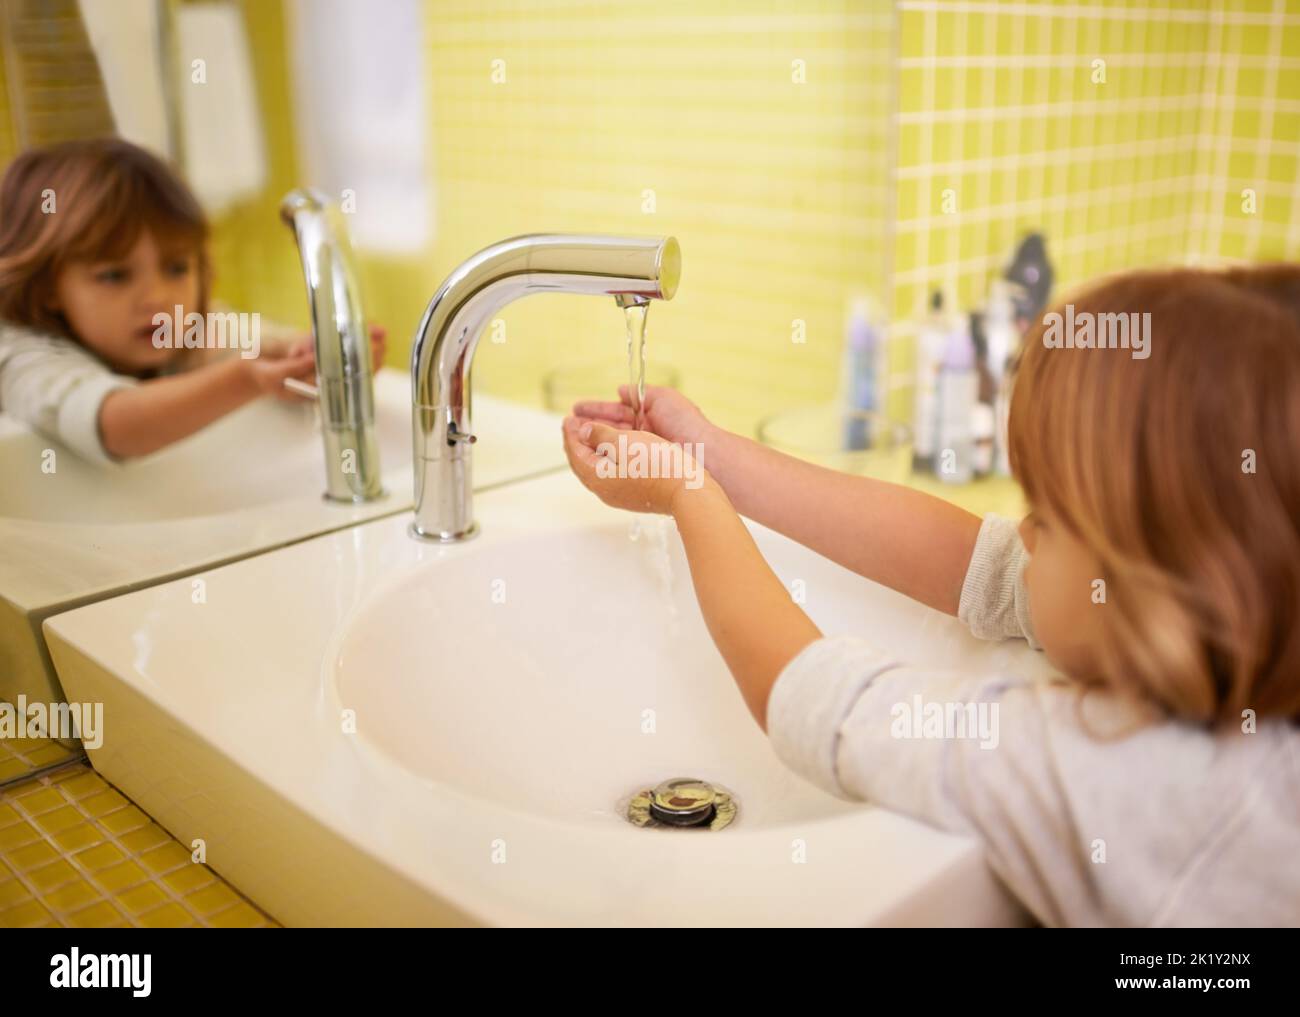 Because Mom said I have to. A cute little girl washing her hands in the bathroom basin. Stock Photo